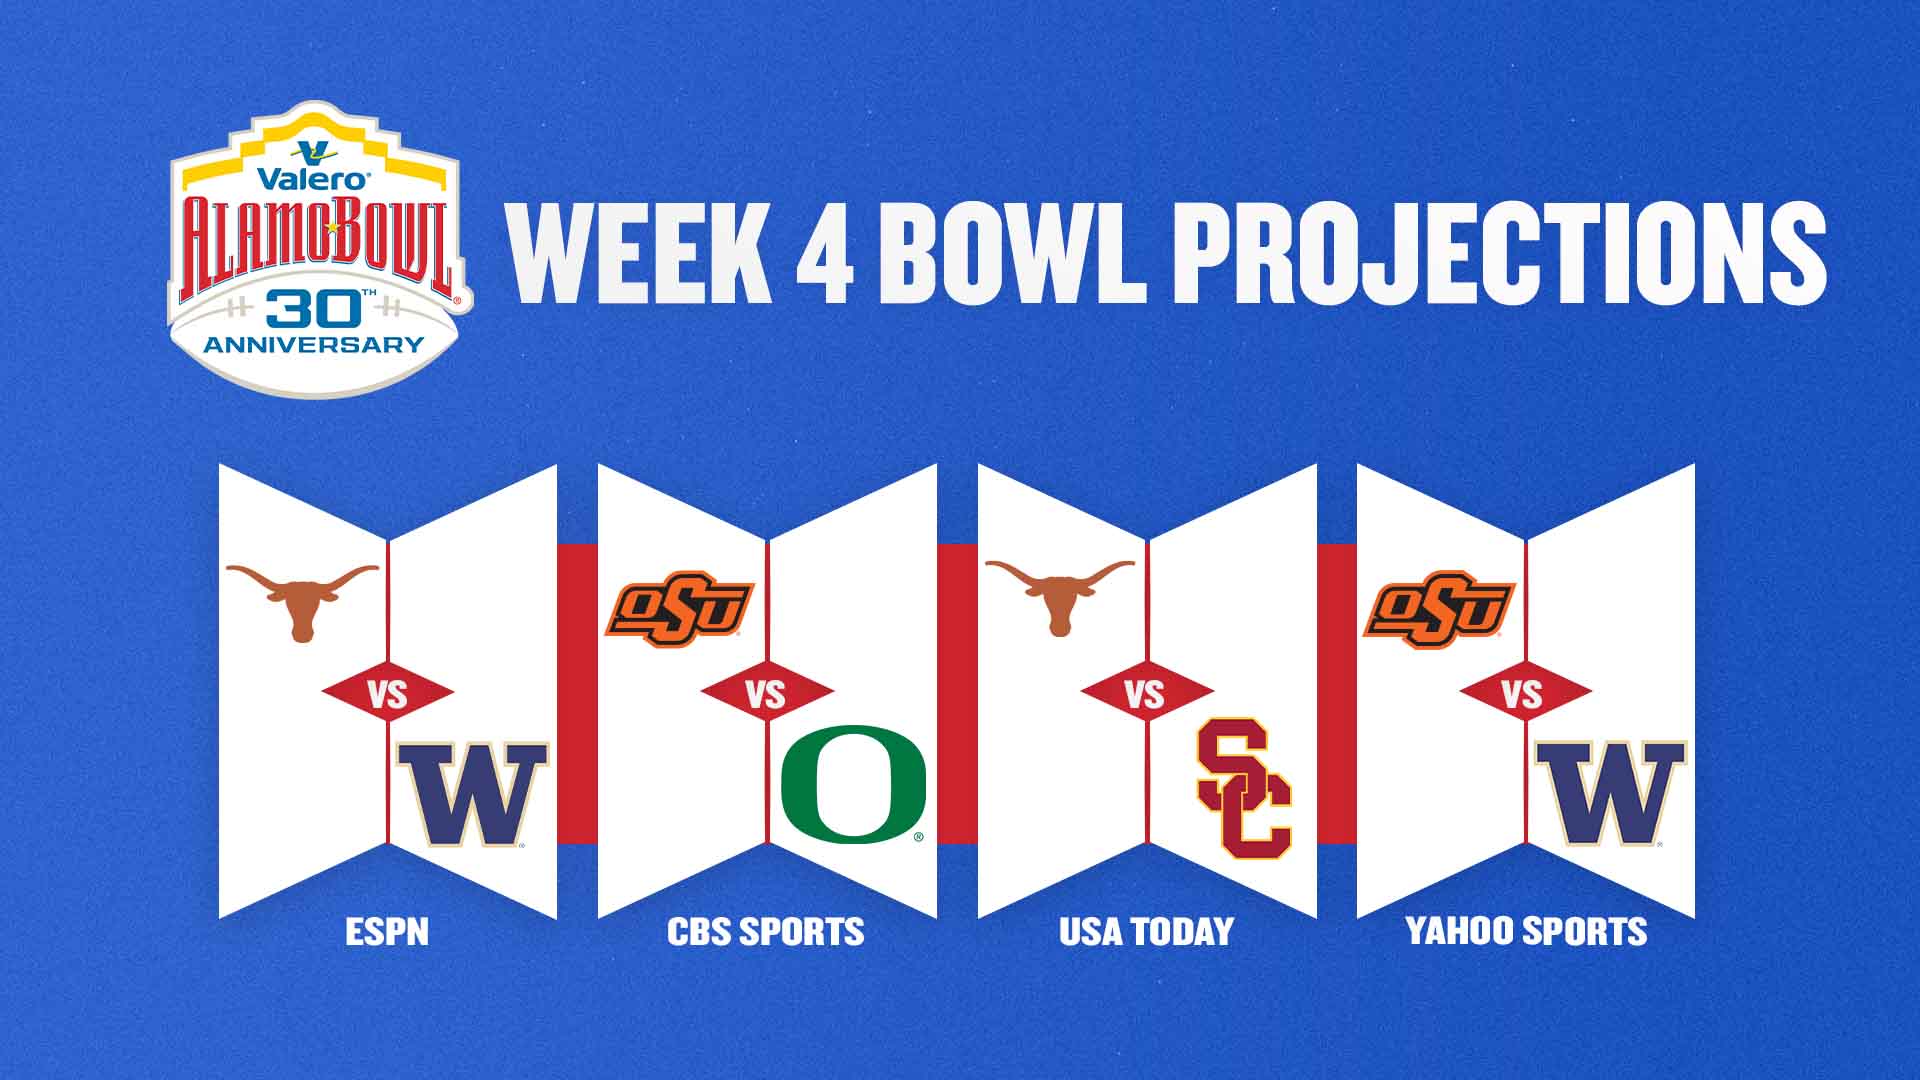 Bowl Projections week 4 NEW. jpg